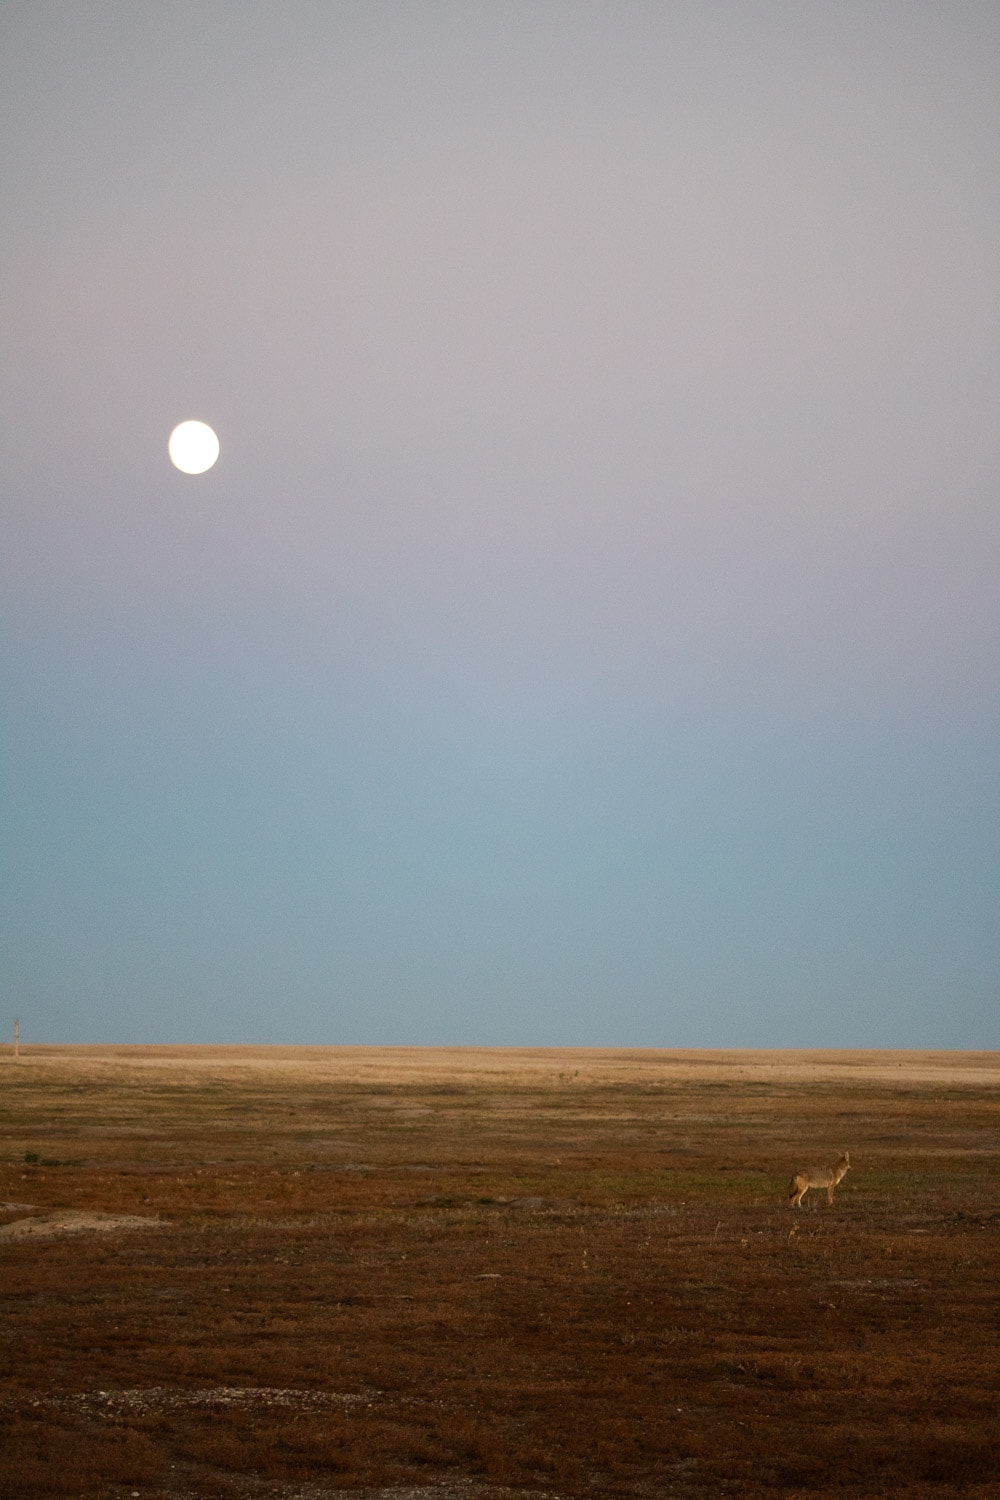 Coyote and full moon at dusk in Badlands National Park, South Dakota